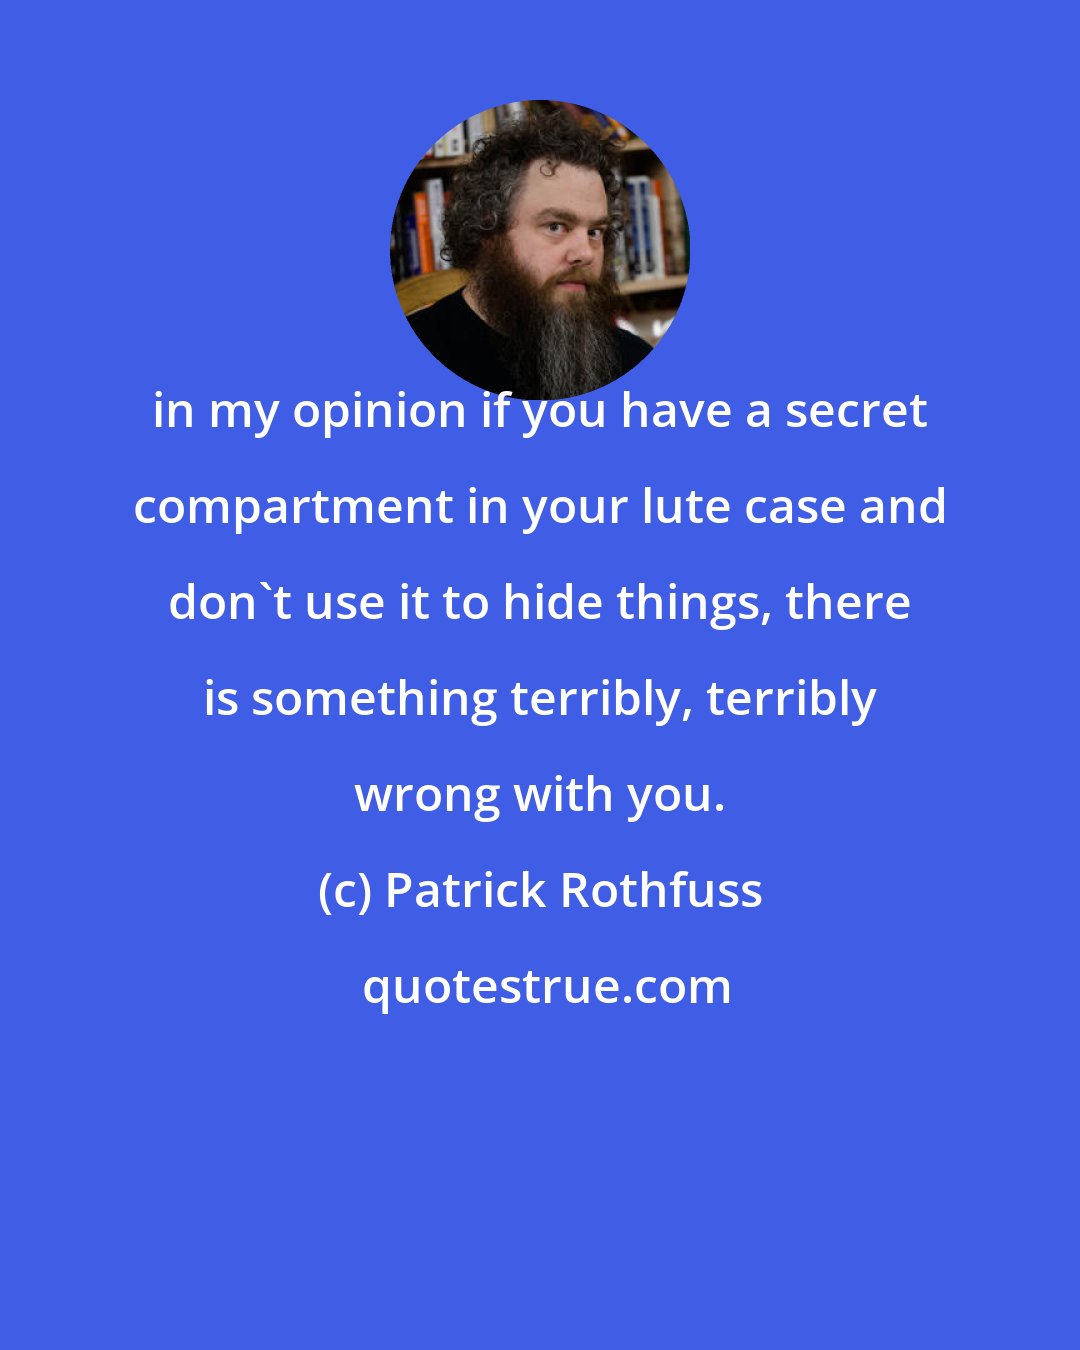 Patrick Rothfuss: in my opinion if you have a secret compartment in your lute case and don't use it to hide things, there is something terribly, terribly wrong with you.